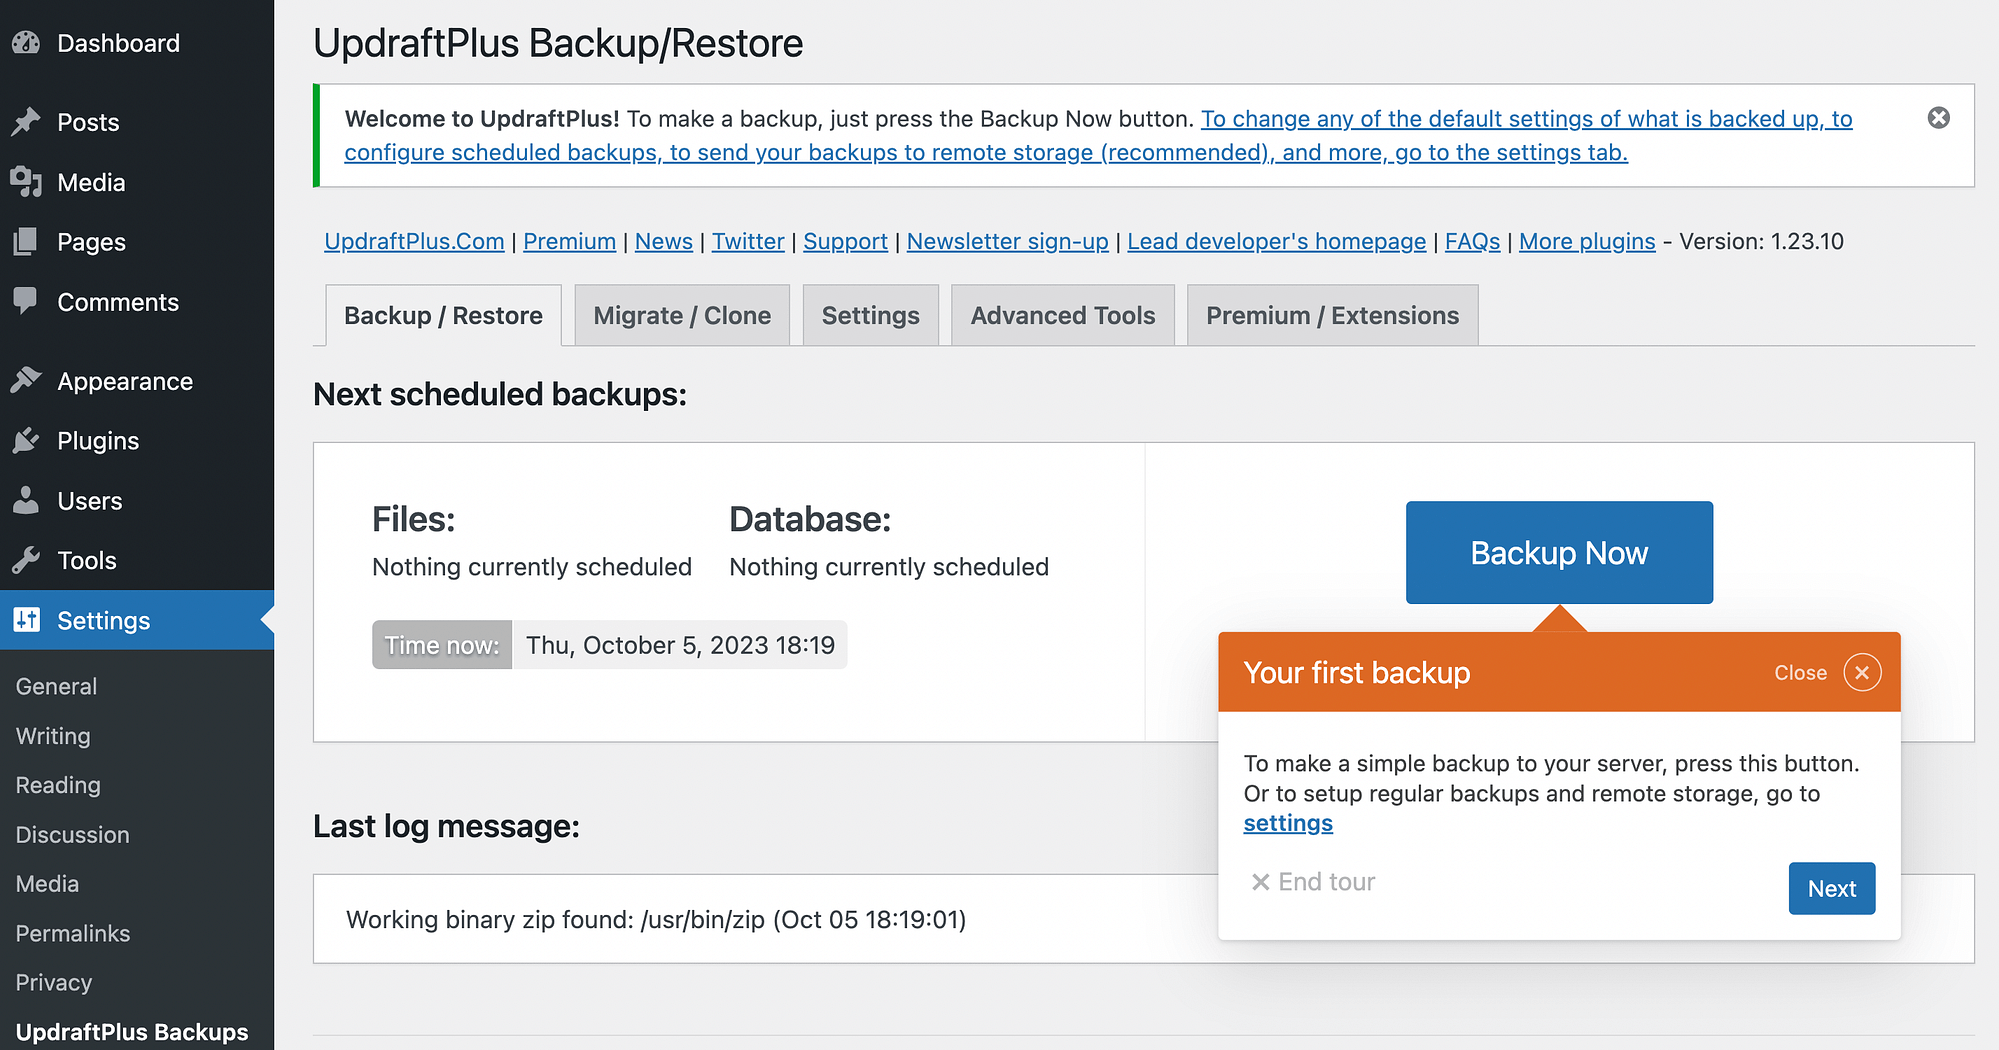 Creating your first backup in UpdraftPlus.